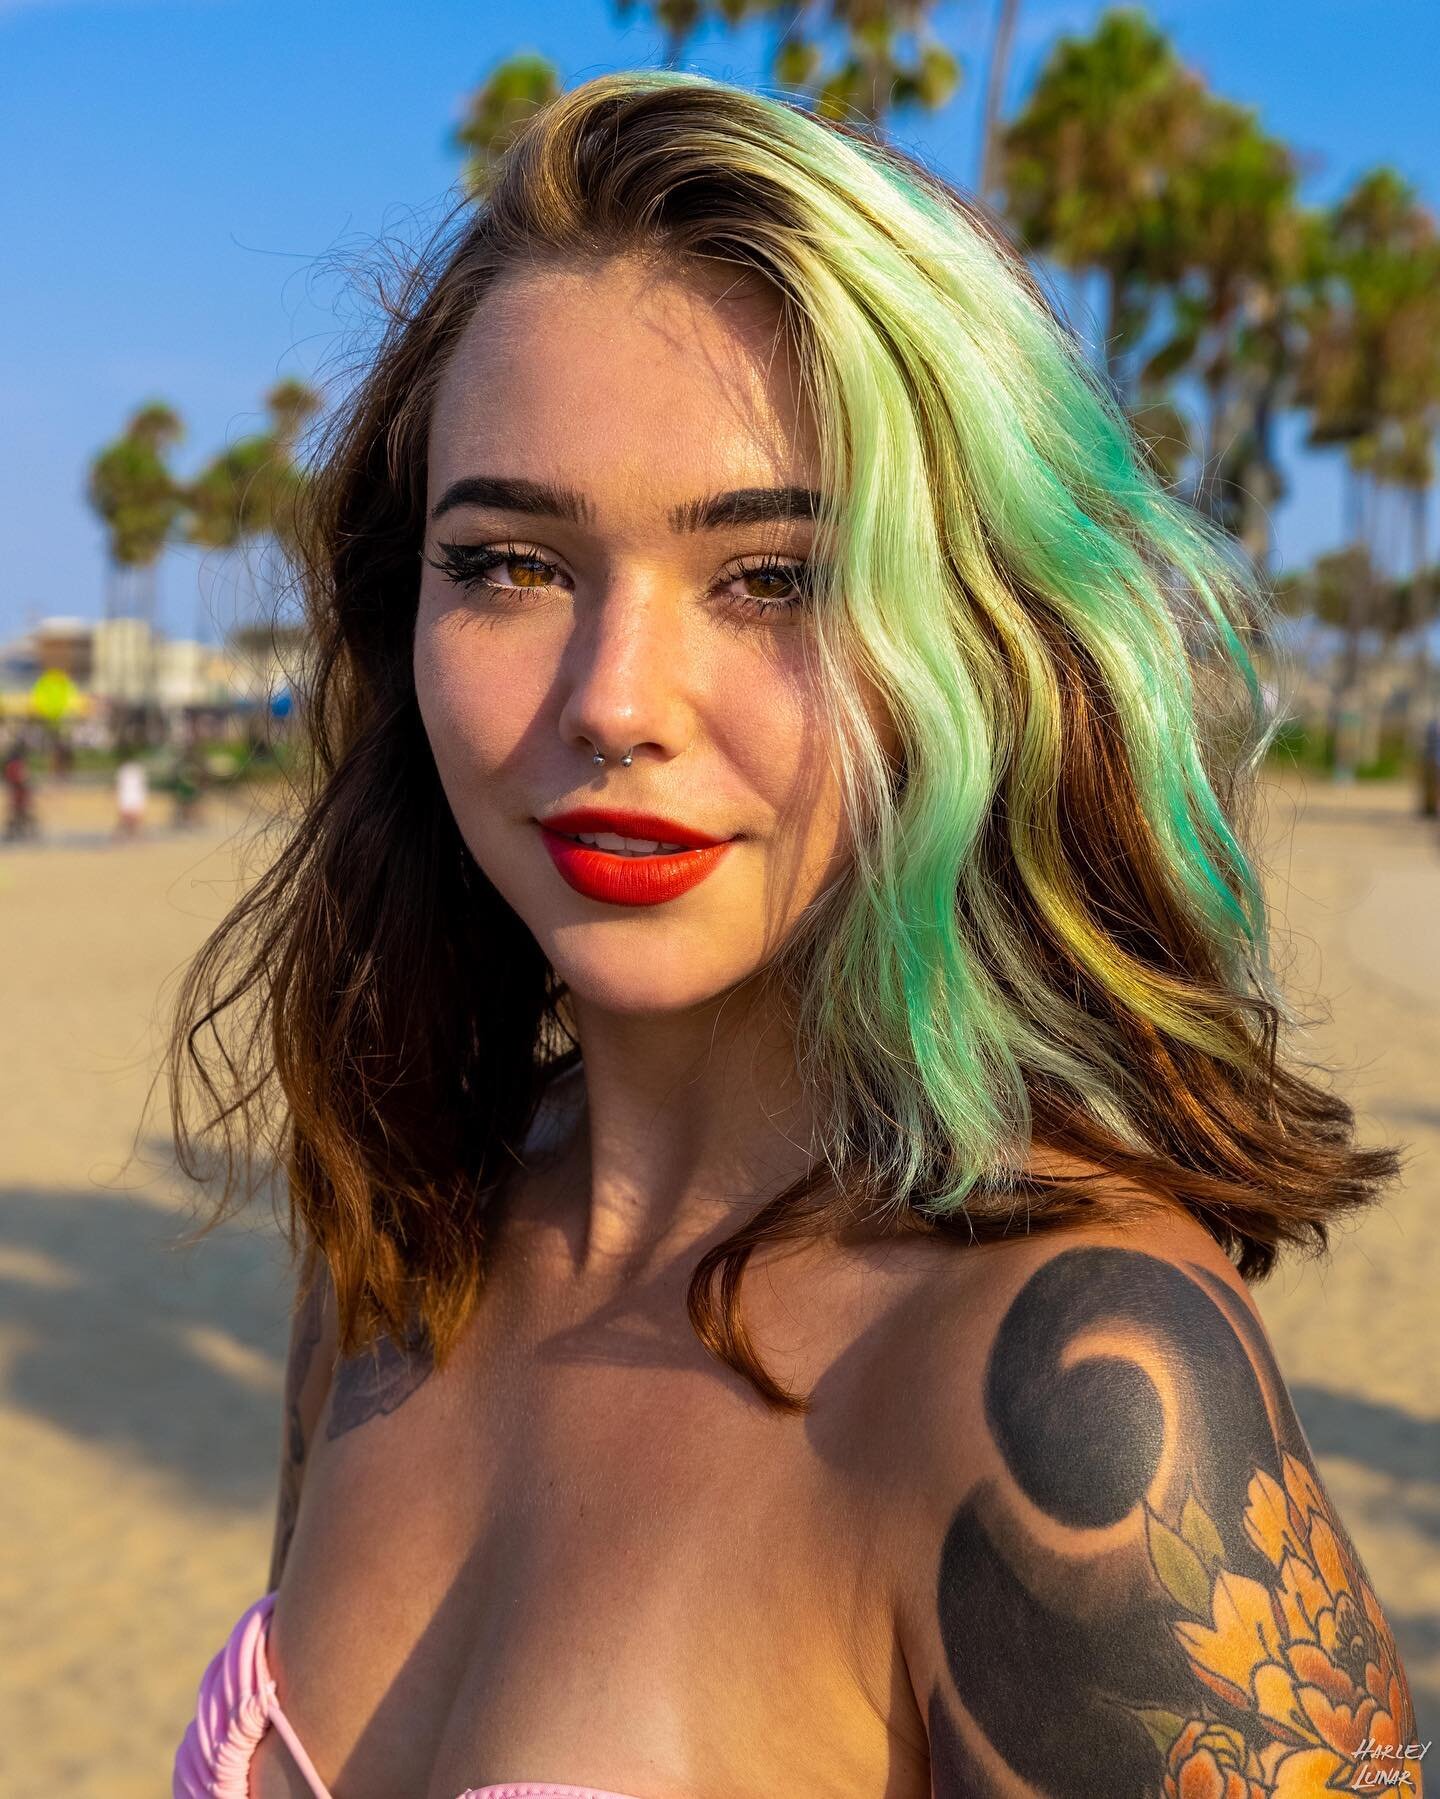 Portraits at #venicebeach for #worldphotographyday 2020

Always beautiful blue skies at the beach in LA, but my shadow annoys me 😭